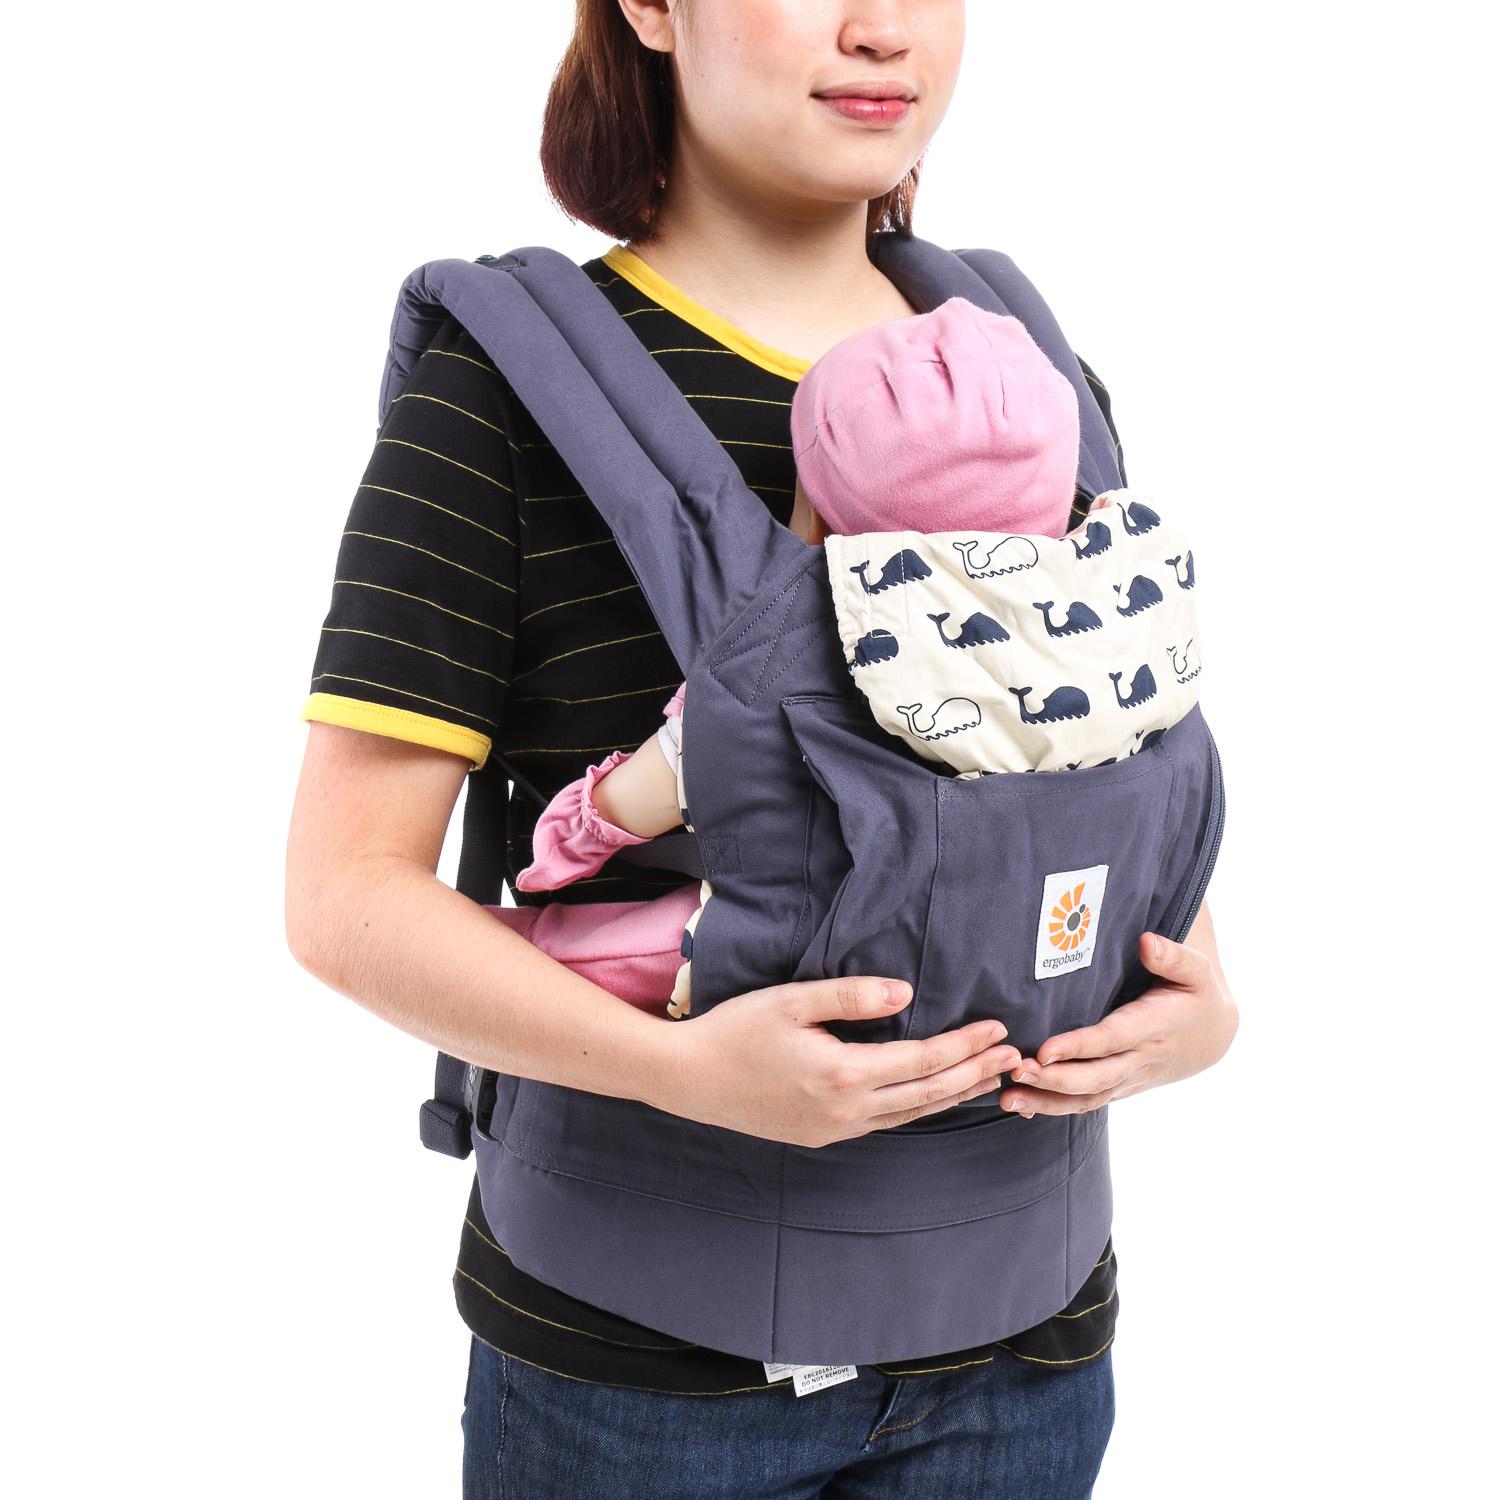 Buy Ergobaby Top Products at Best 